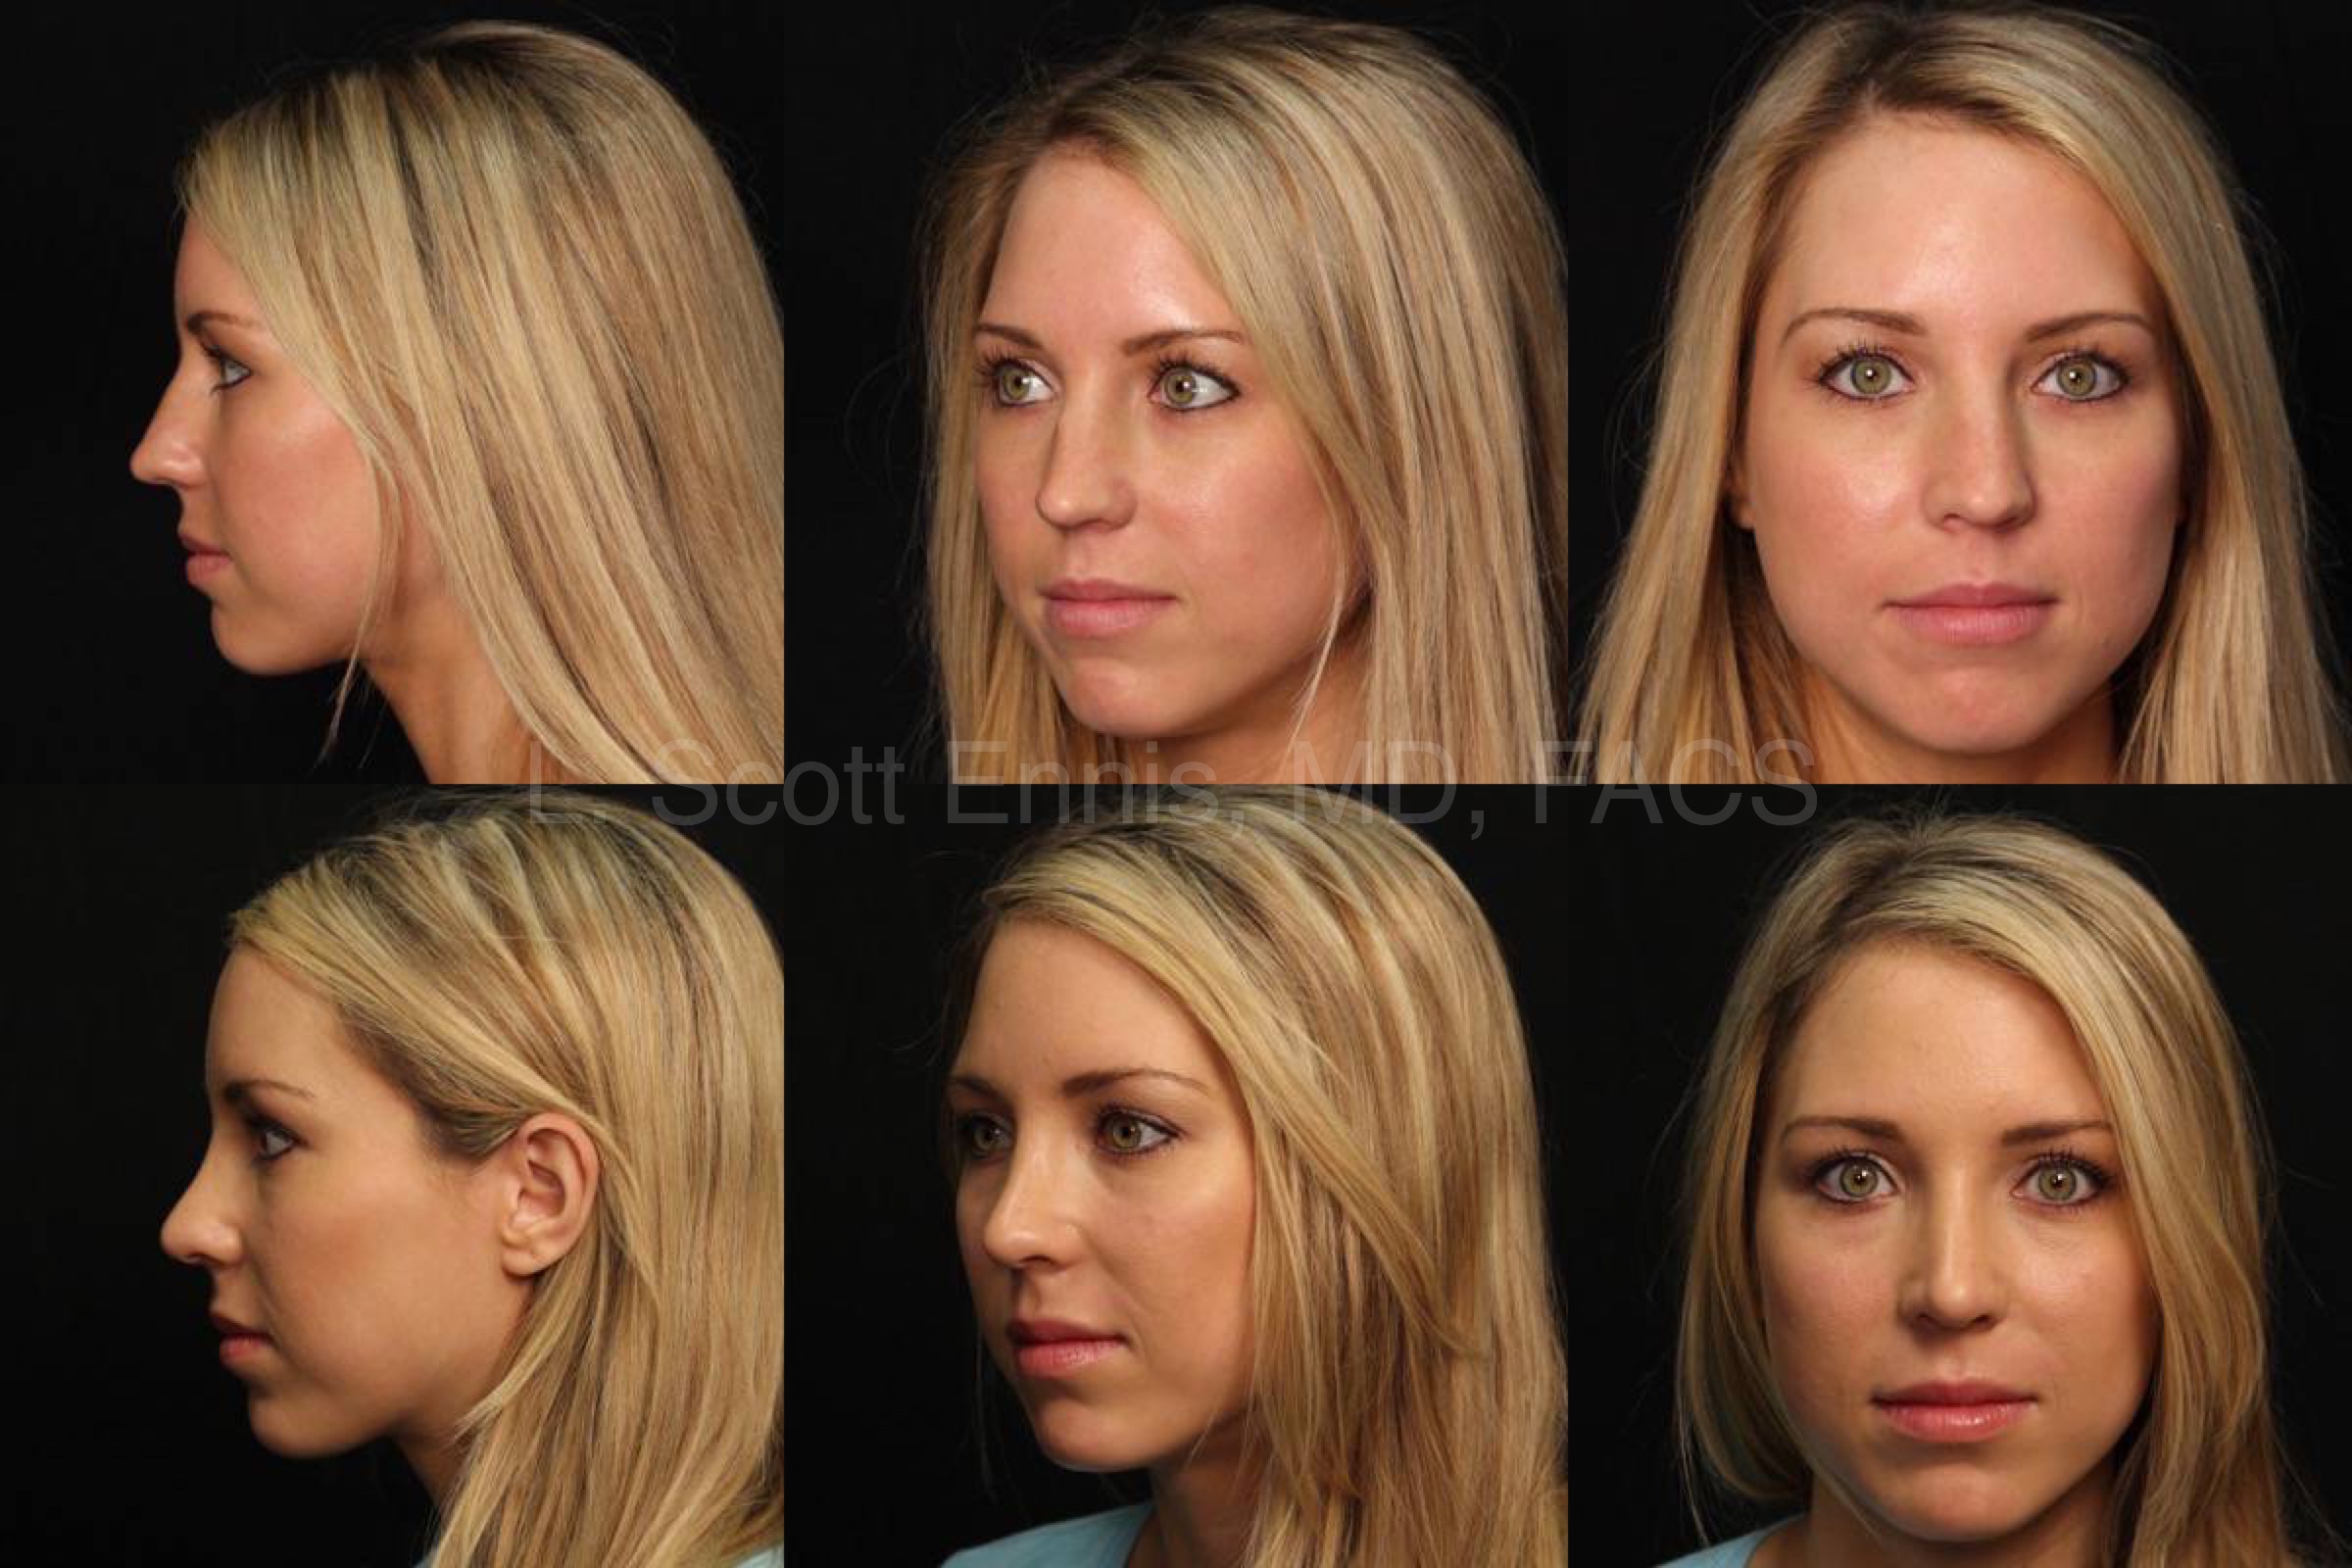 What Is the Best Age for Getting Rhinoplasty? Boulder CO - Boulder Plastic  Surgery